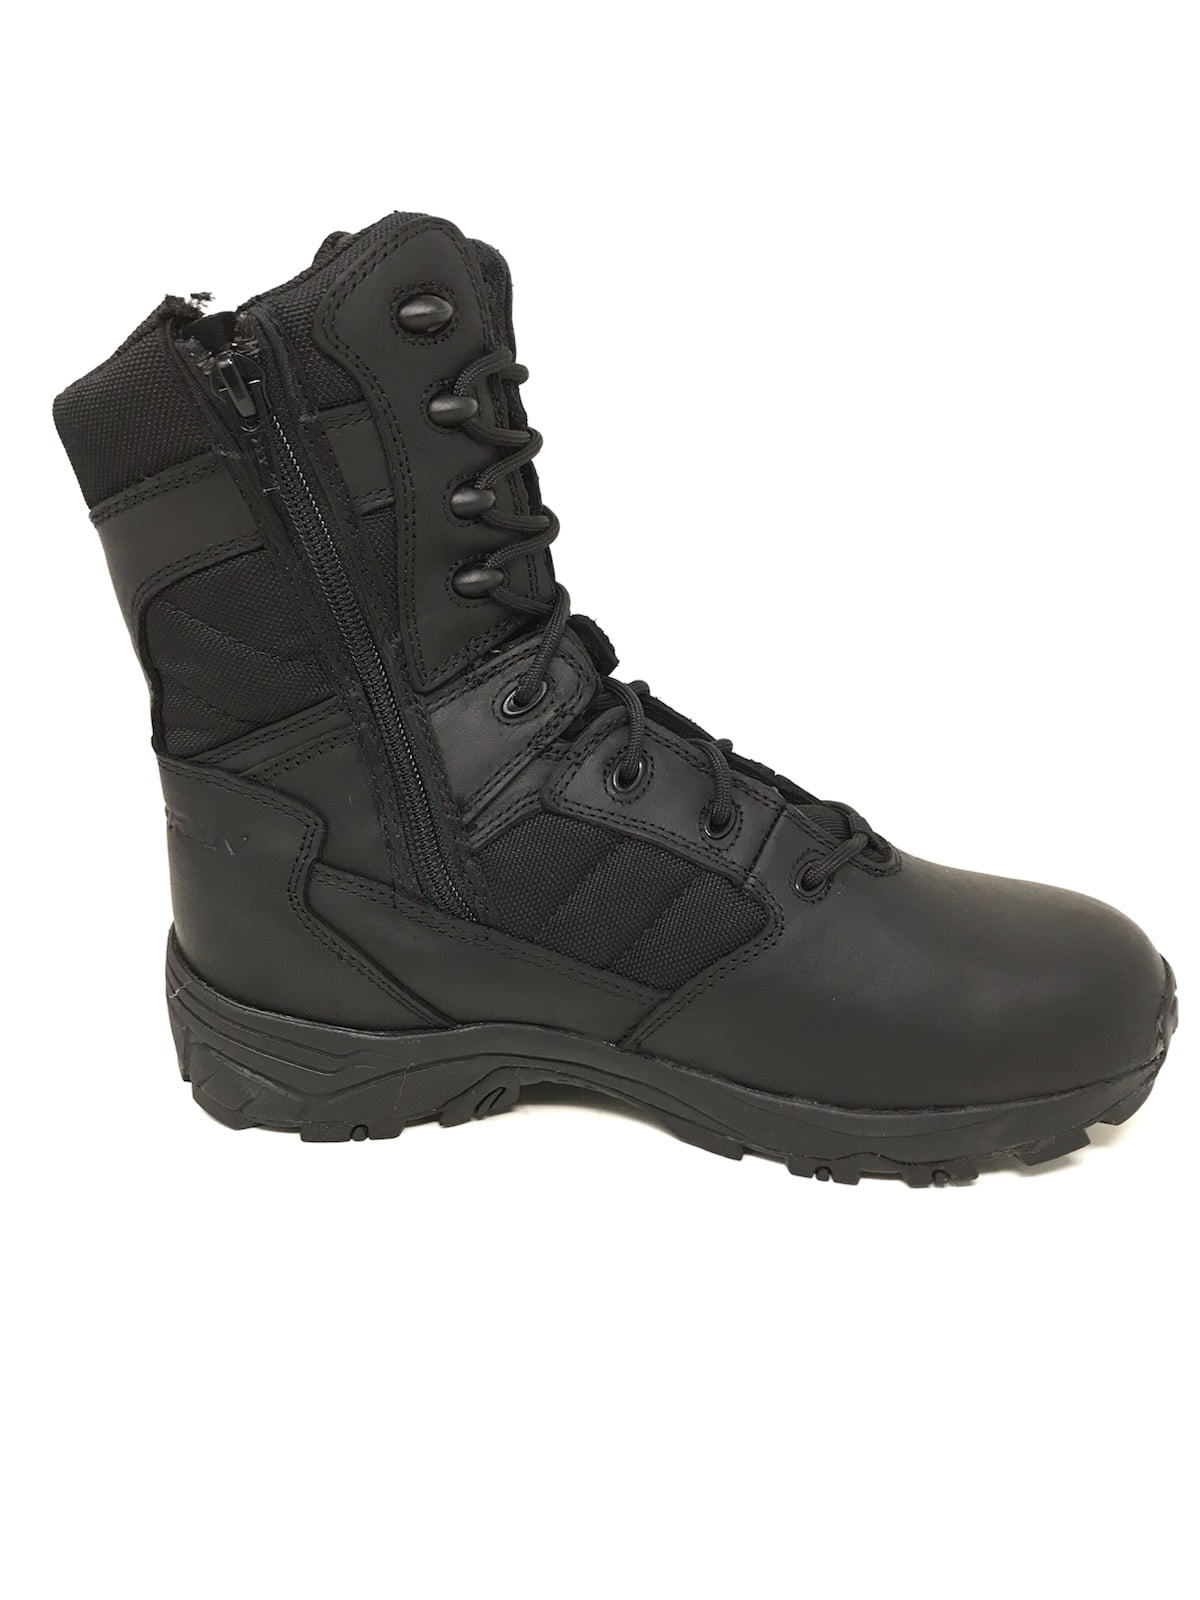 mens wide boots with zipper